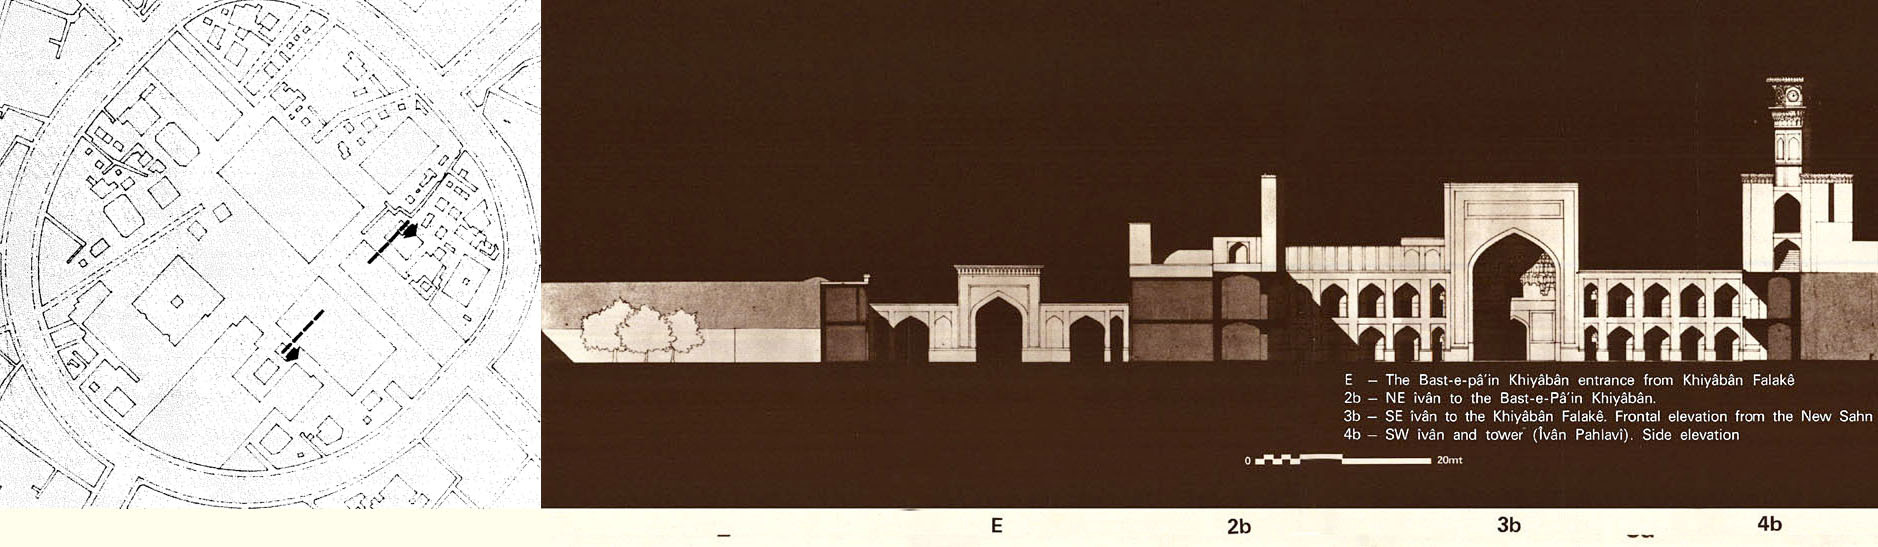 Transverse section, showing from left to right: Bast-e-Pa'in entrance from Khiyaban Falake (E); NE iwan to the Bast-e-Pa'in Khiyaban (2b); SE iwan to the Khiyaban Falake, frontal elevation from new courtyard (3b); side elevation of SW iwan and tower (or, Iwan Pahlavi, 4b)